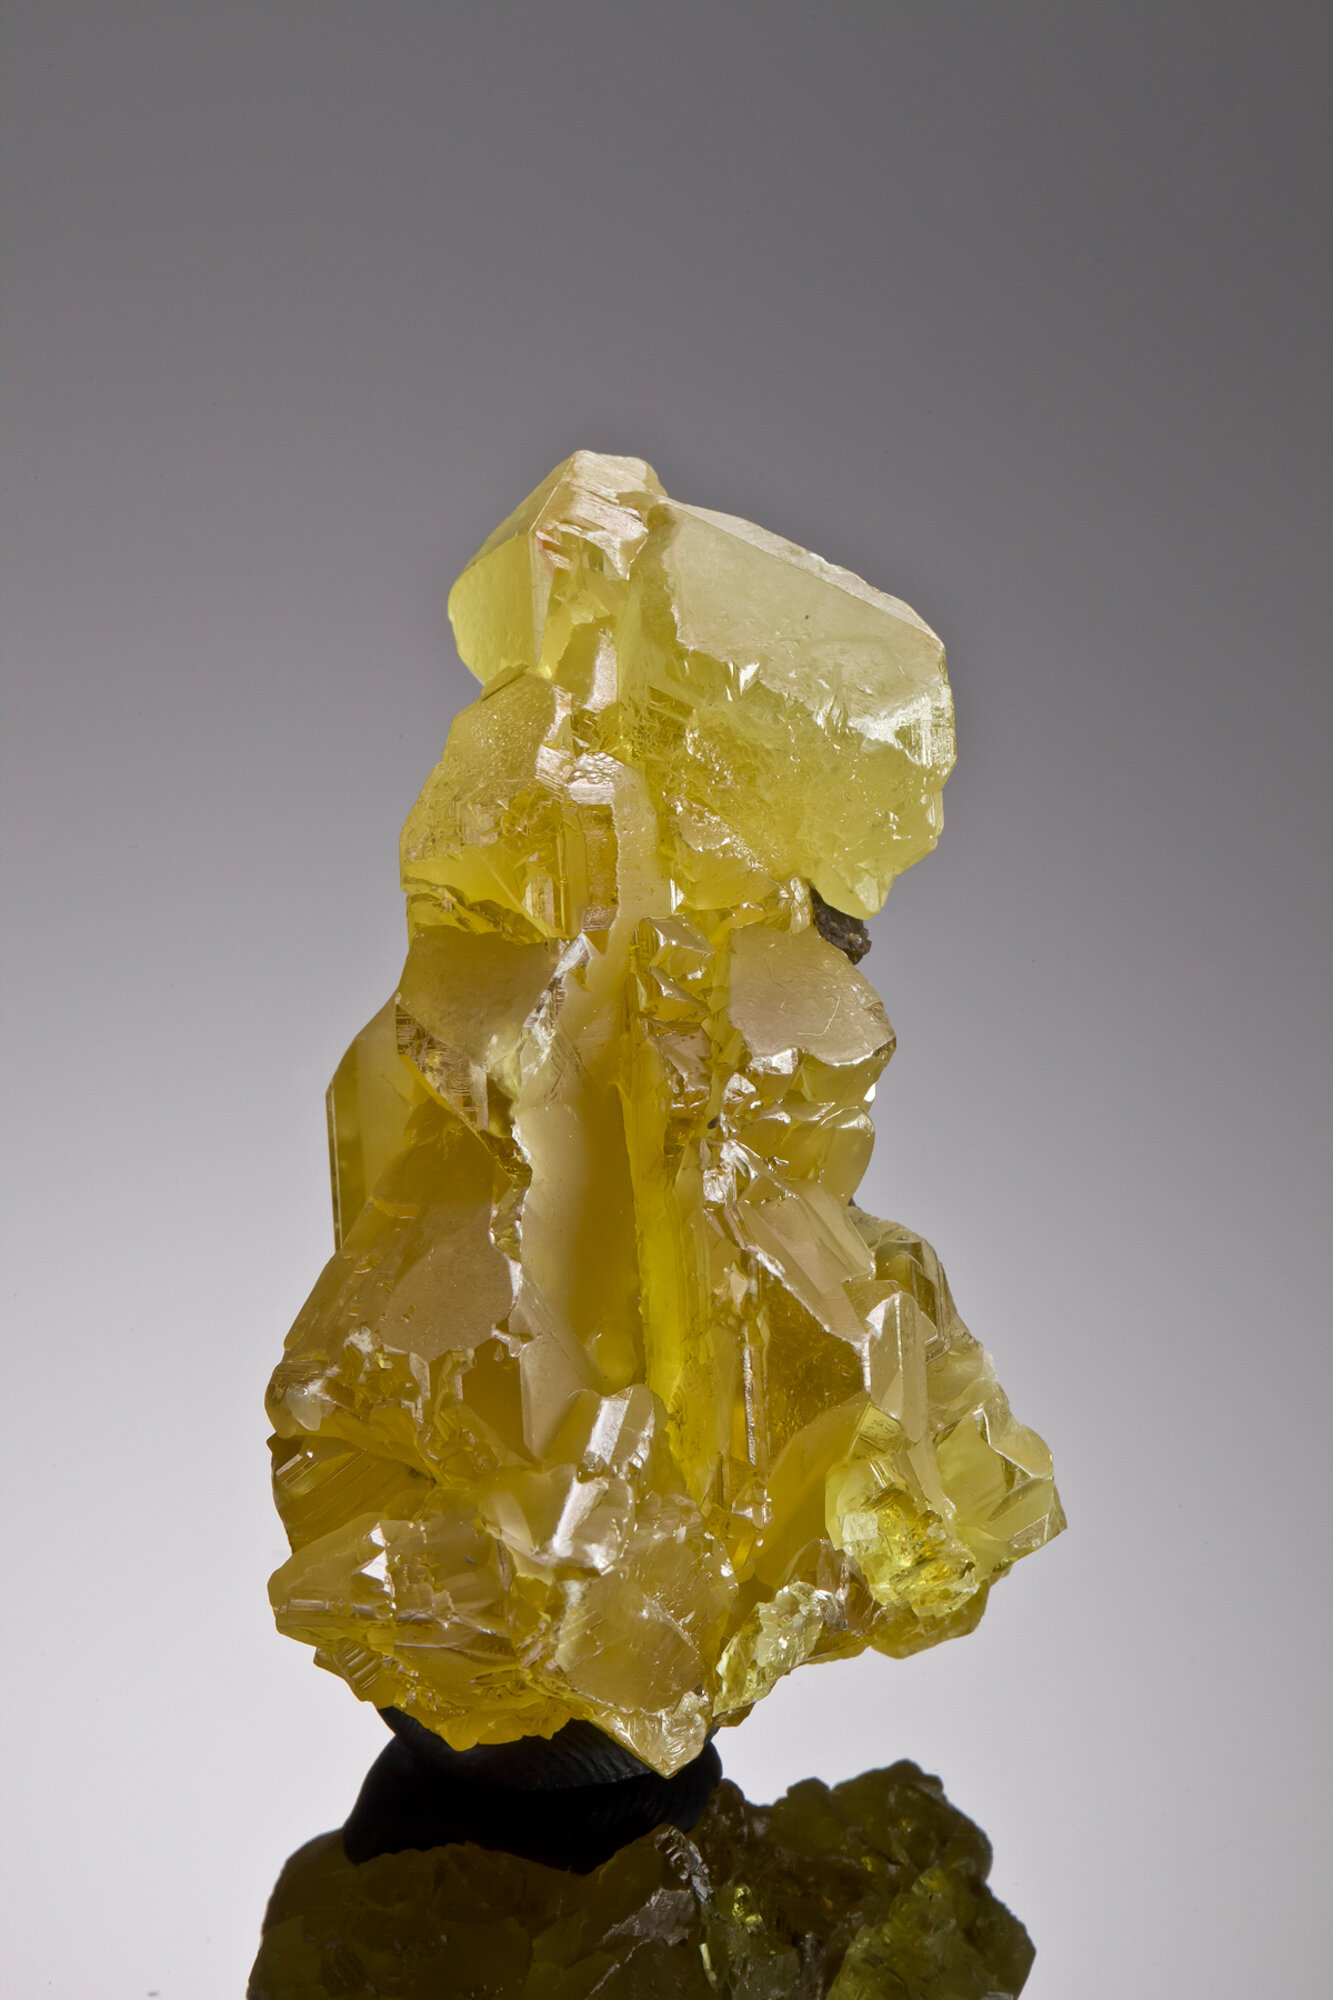  Sphalerite crystal group, 5.6 cm, from the Huanggang mine, Keshiketeng County, Chifeng Prefecture, Inner Mongolia Autonomous Region, China. Found in 2012. 